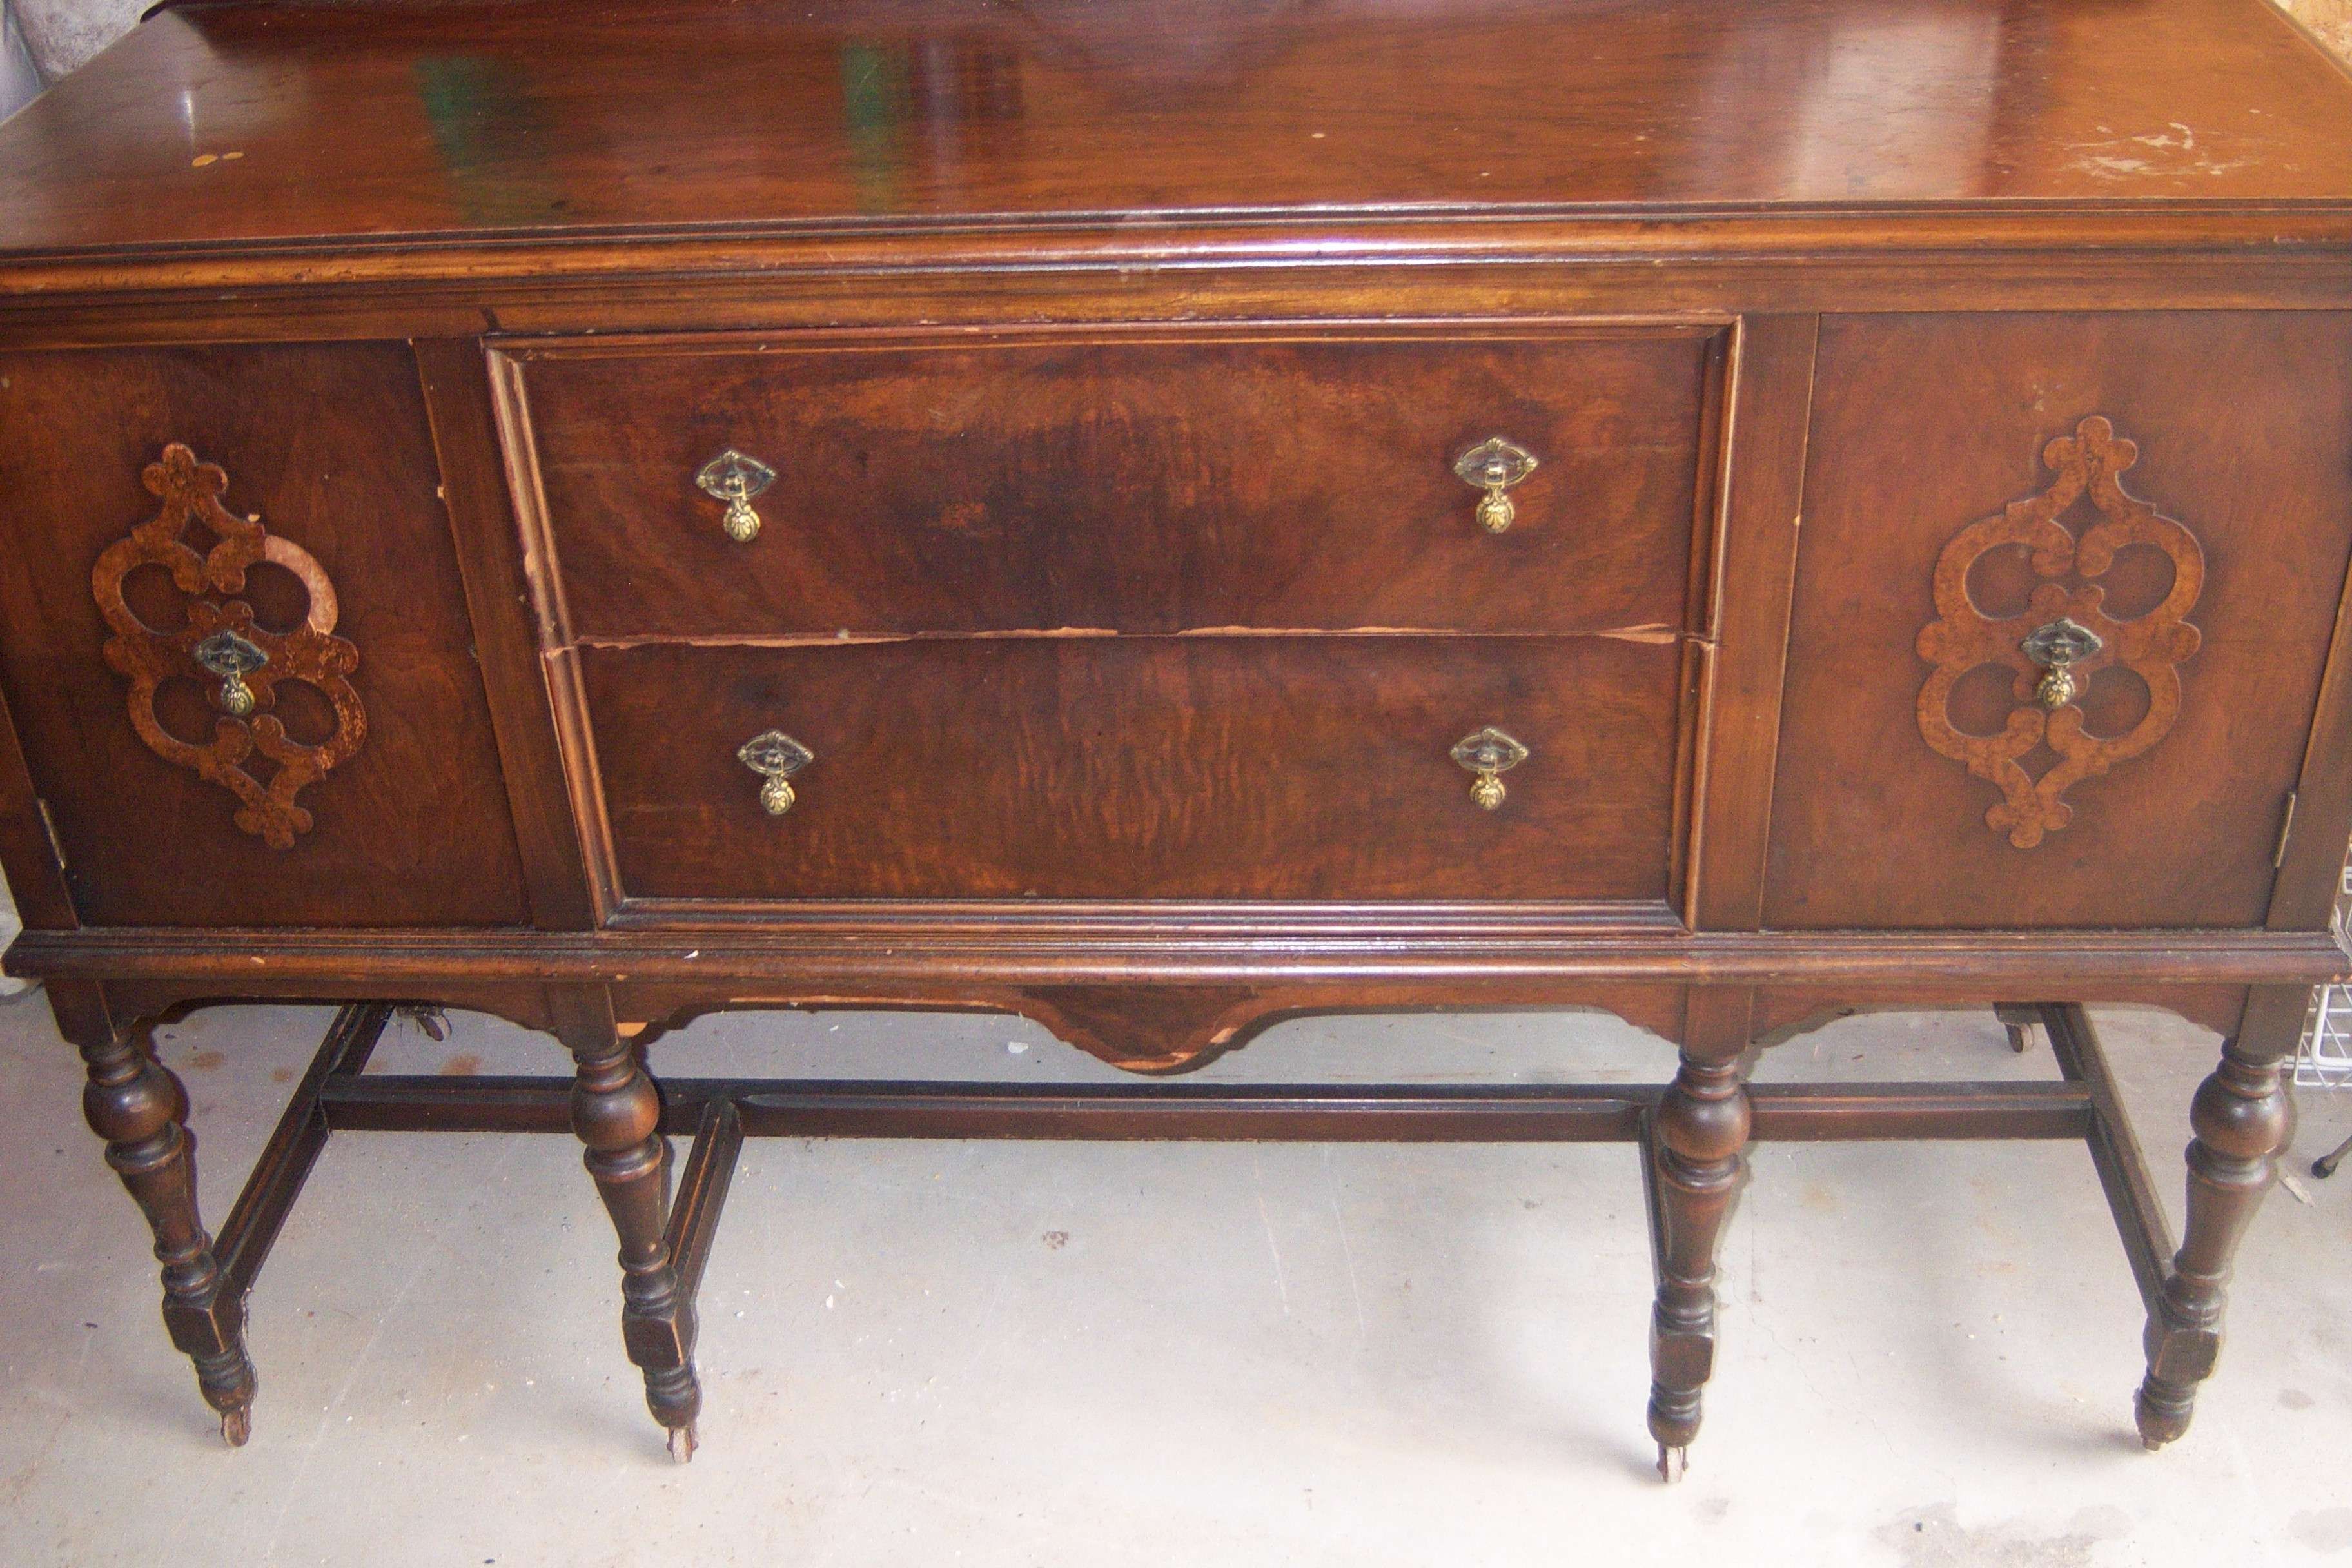 Beautiful Antique Sideboards And Buffets – Bjdgjy Inside Antique Buffet Sideboards (View 1 of 20)